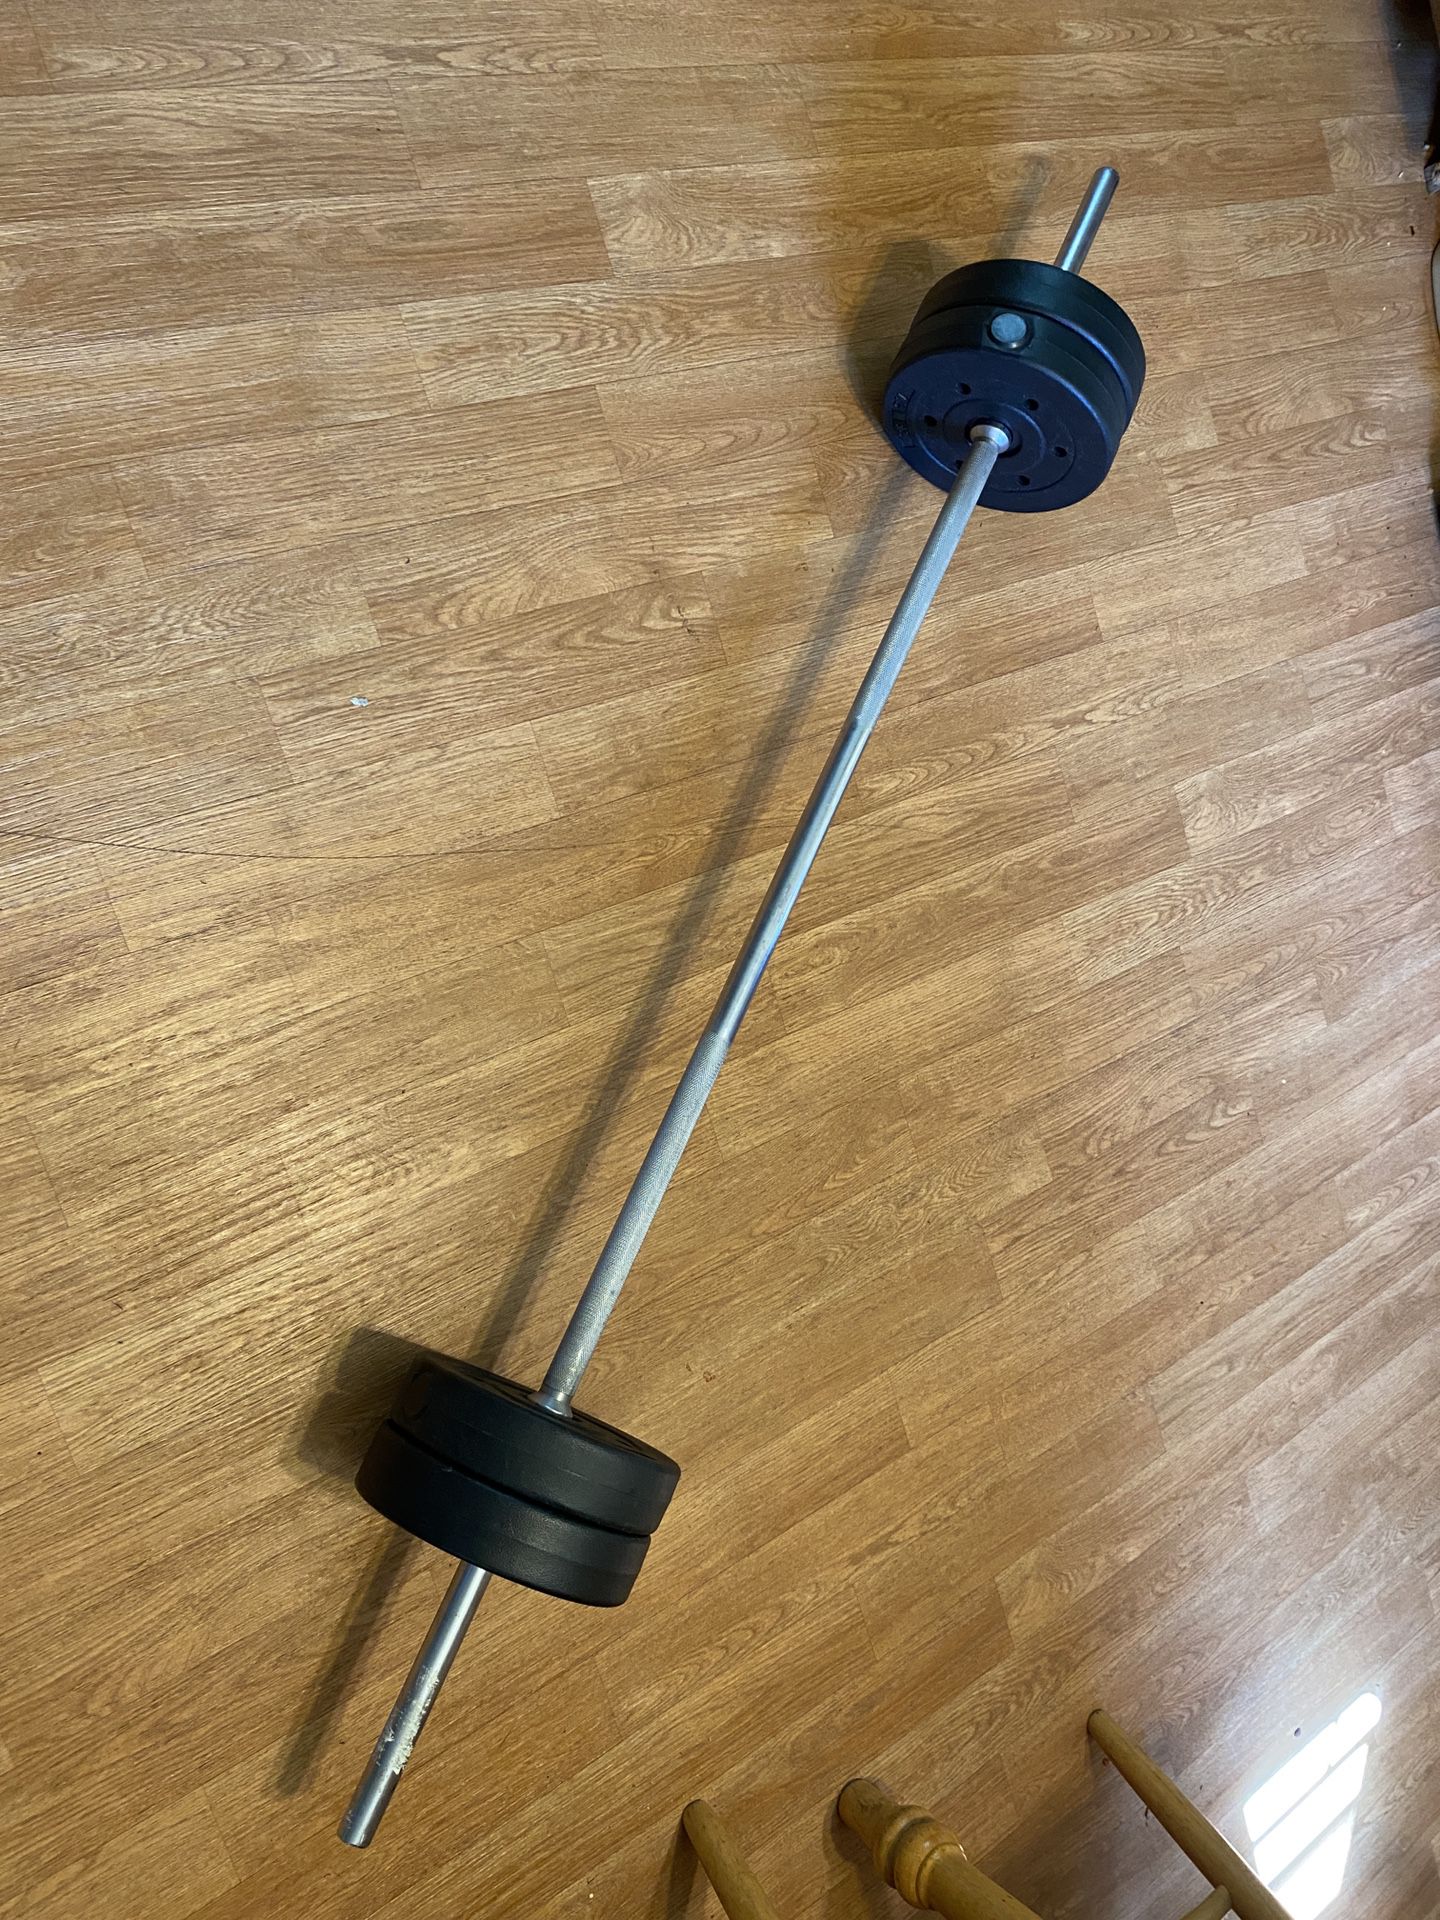 Weight Bar With Weights